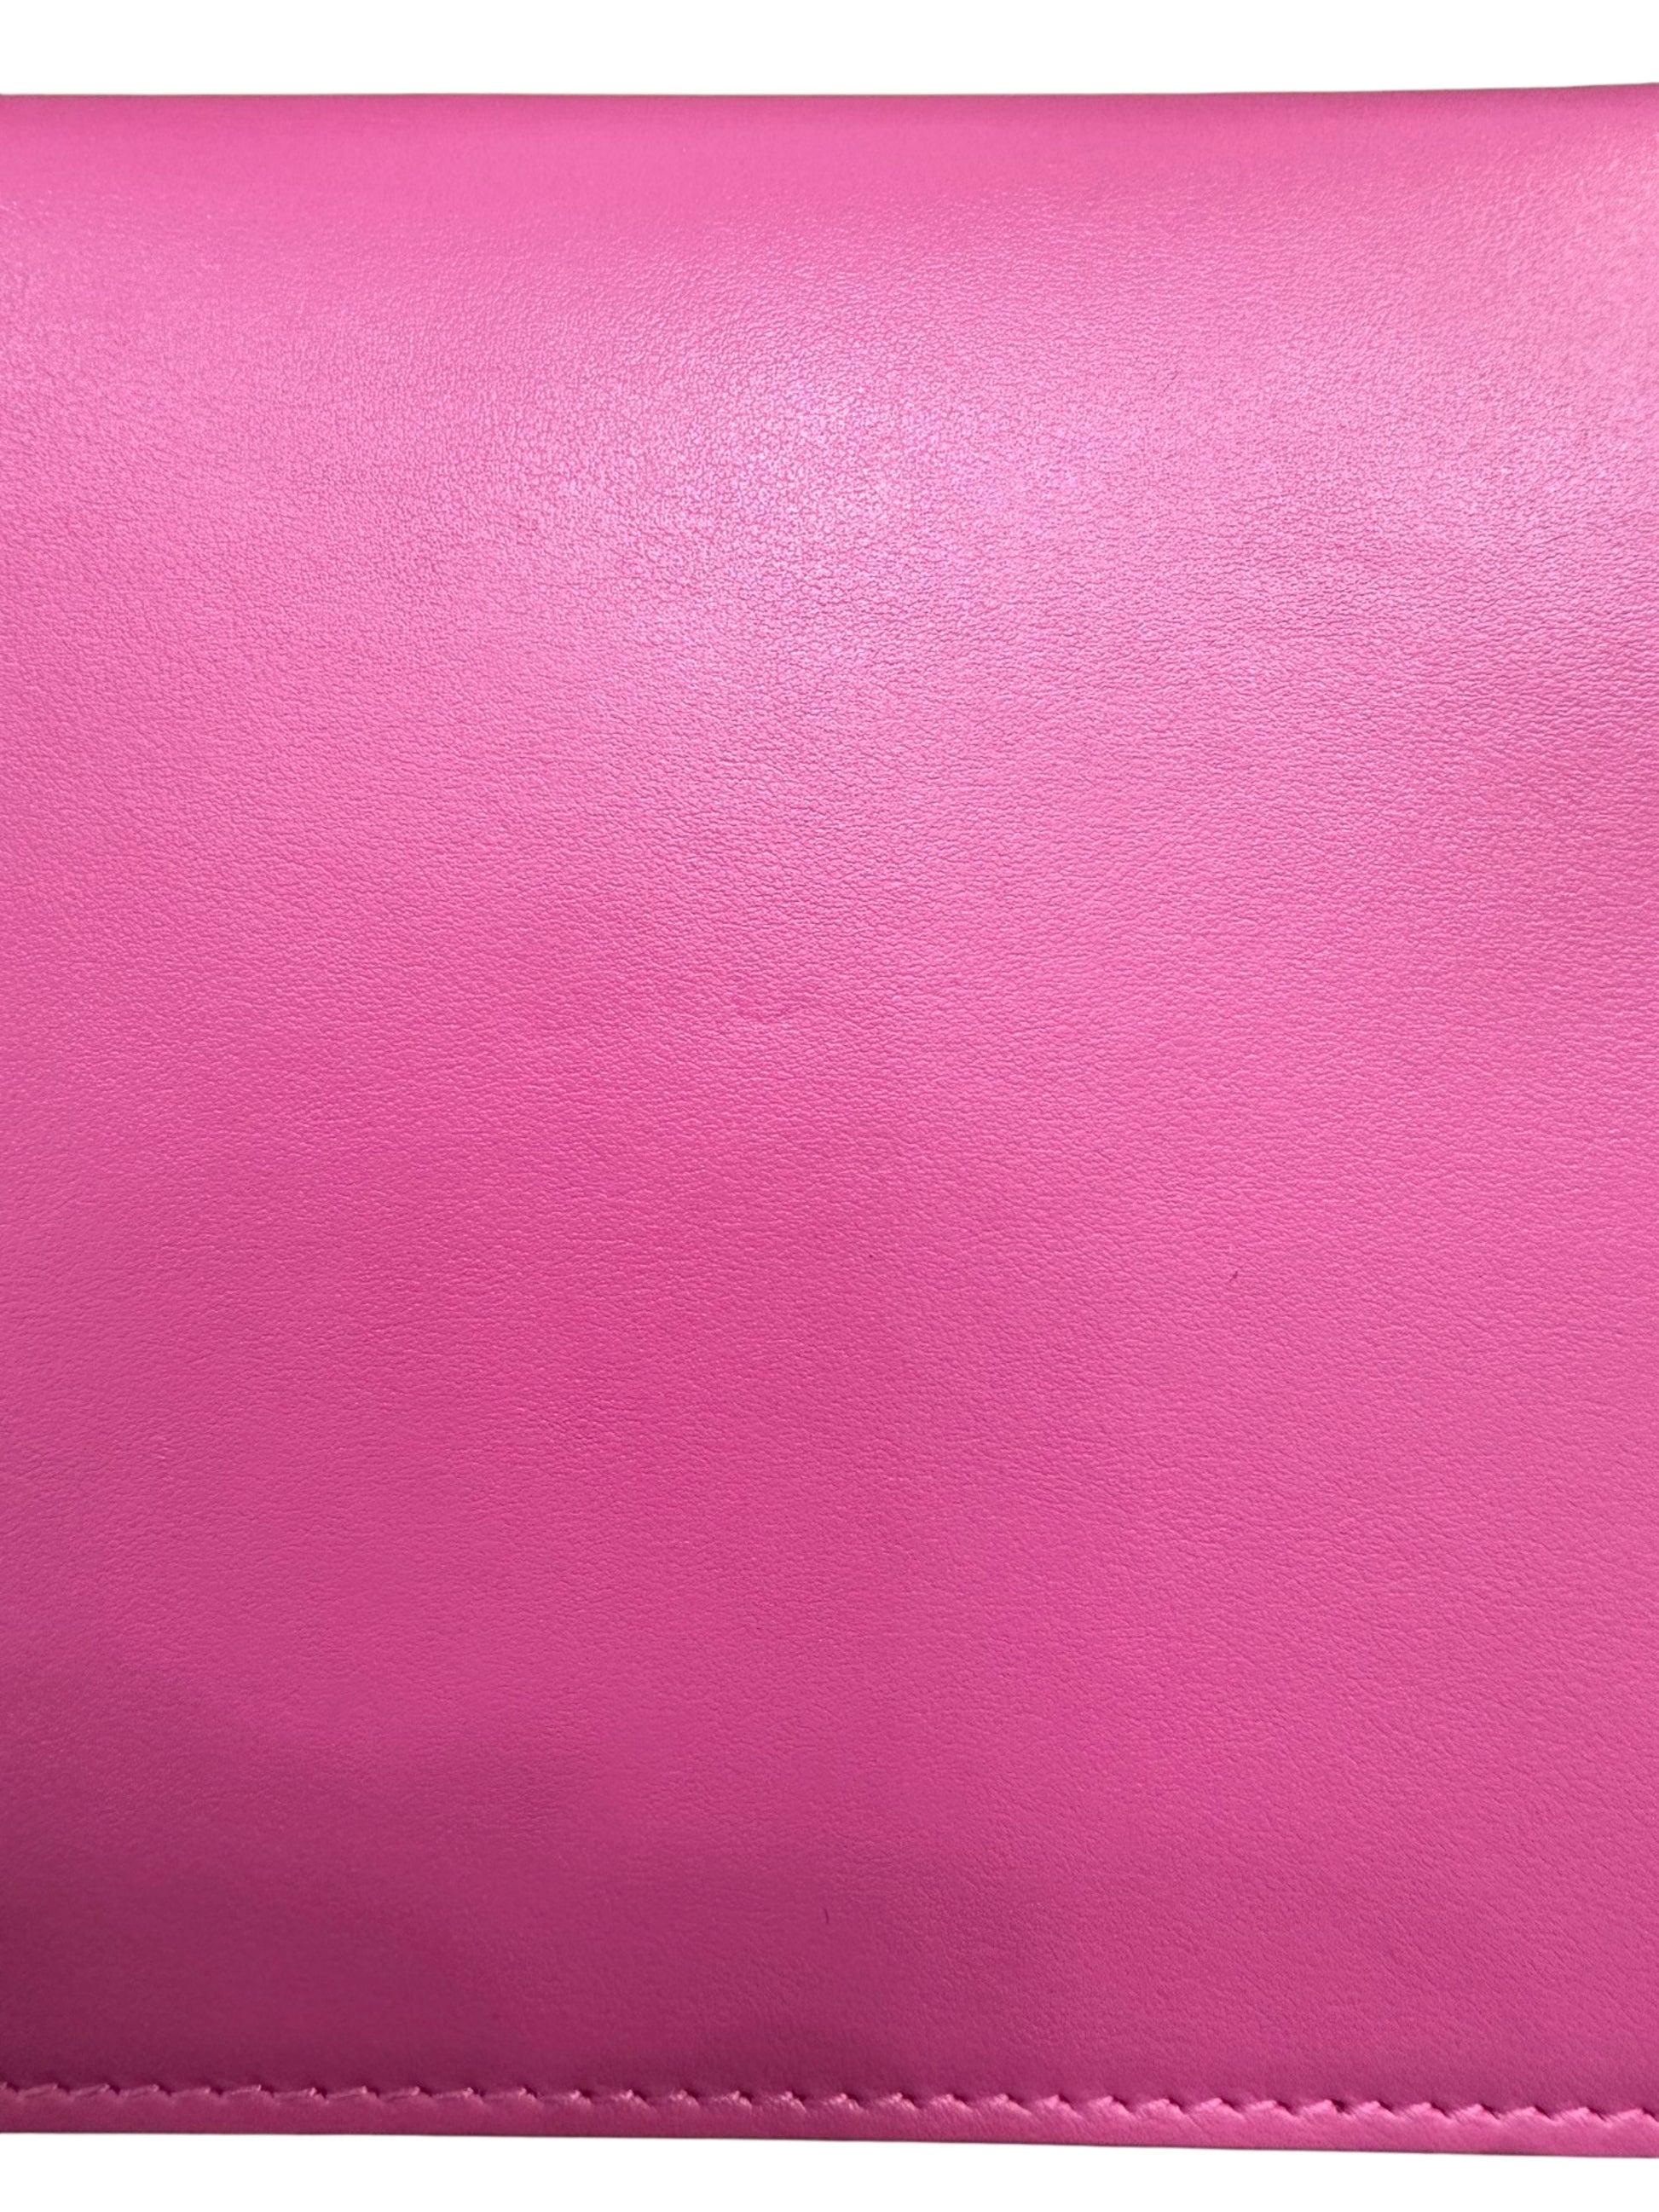 Close up of back of pink bag with light scuff mark in the middle